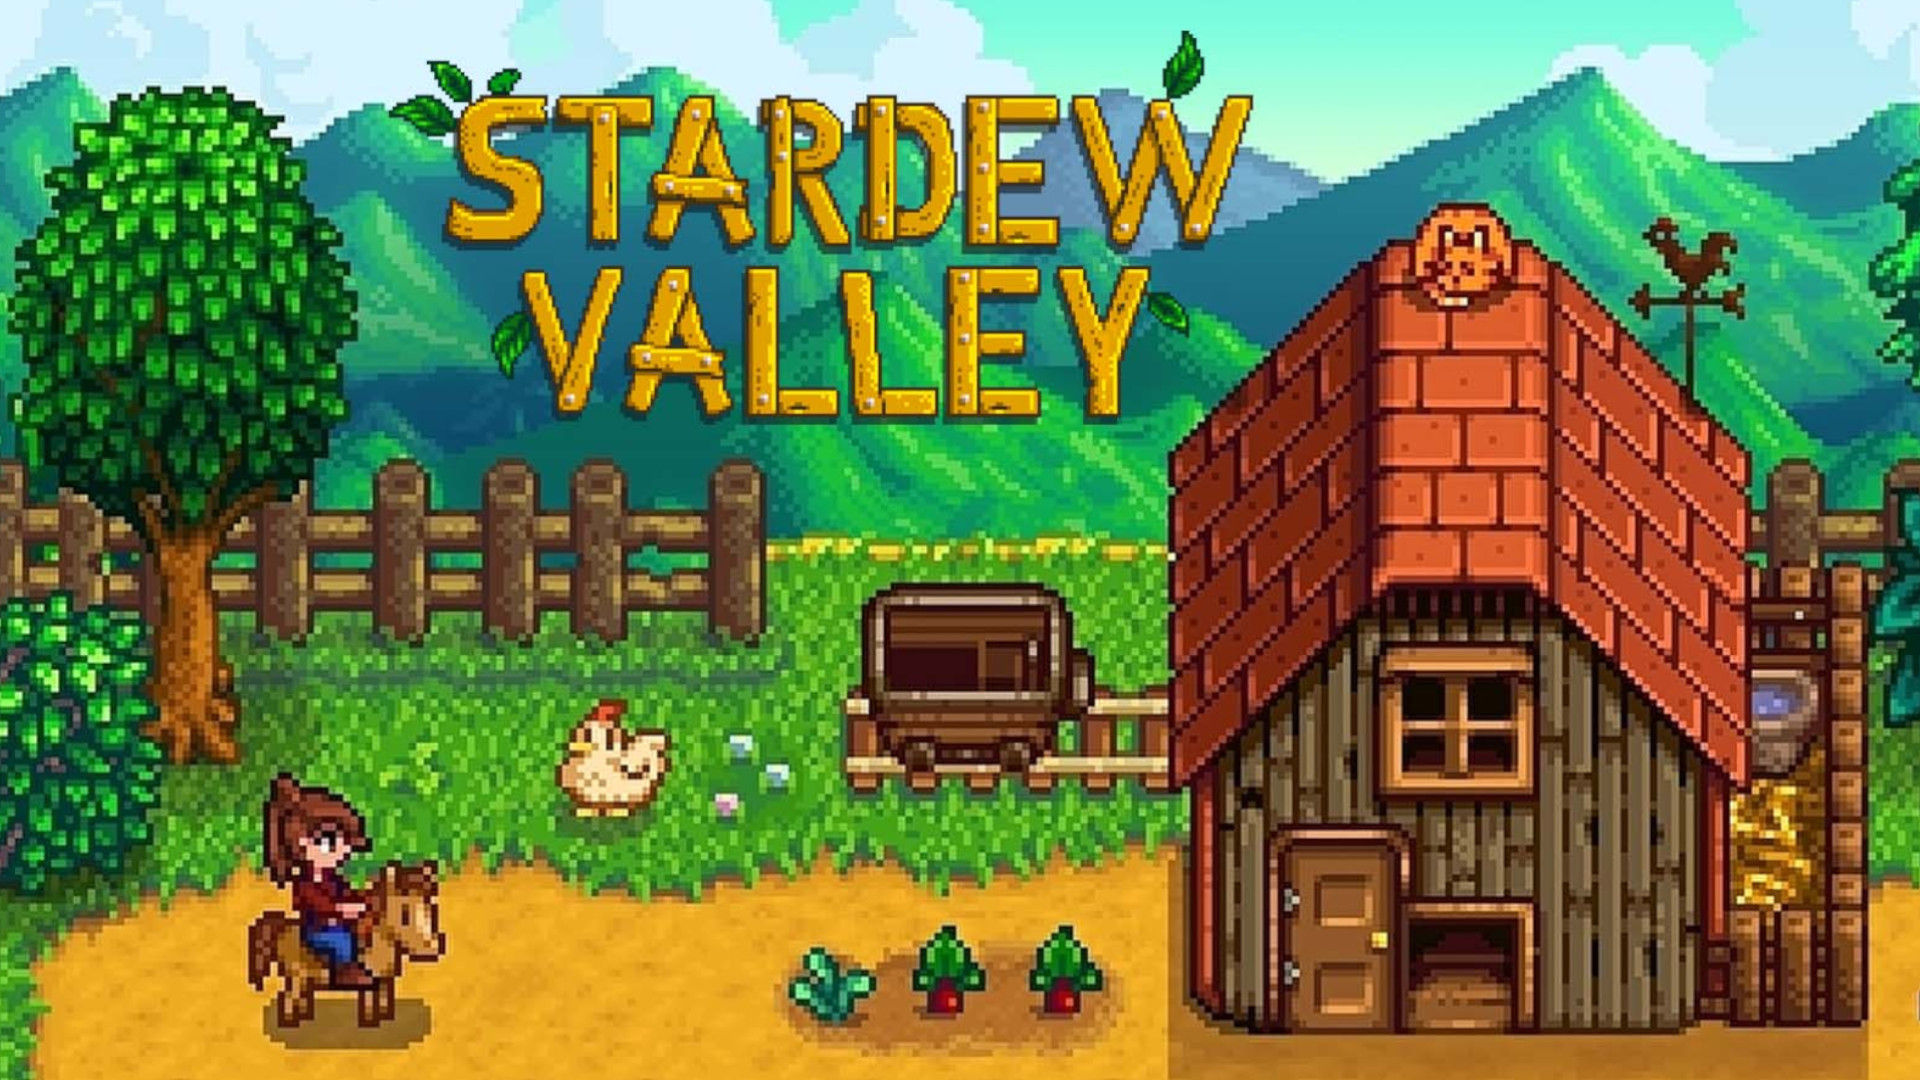 Stardew Valley cover, one of the best fishing games